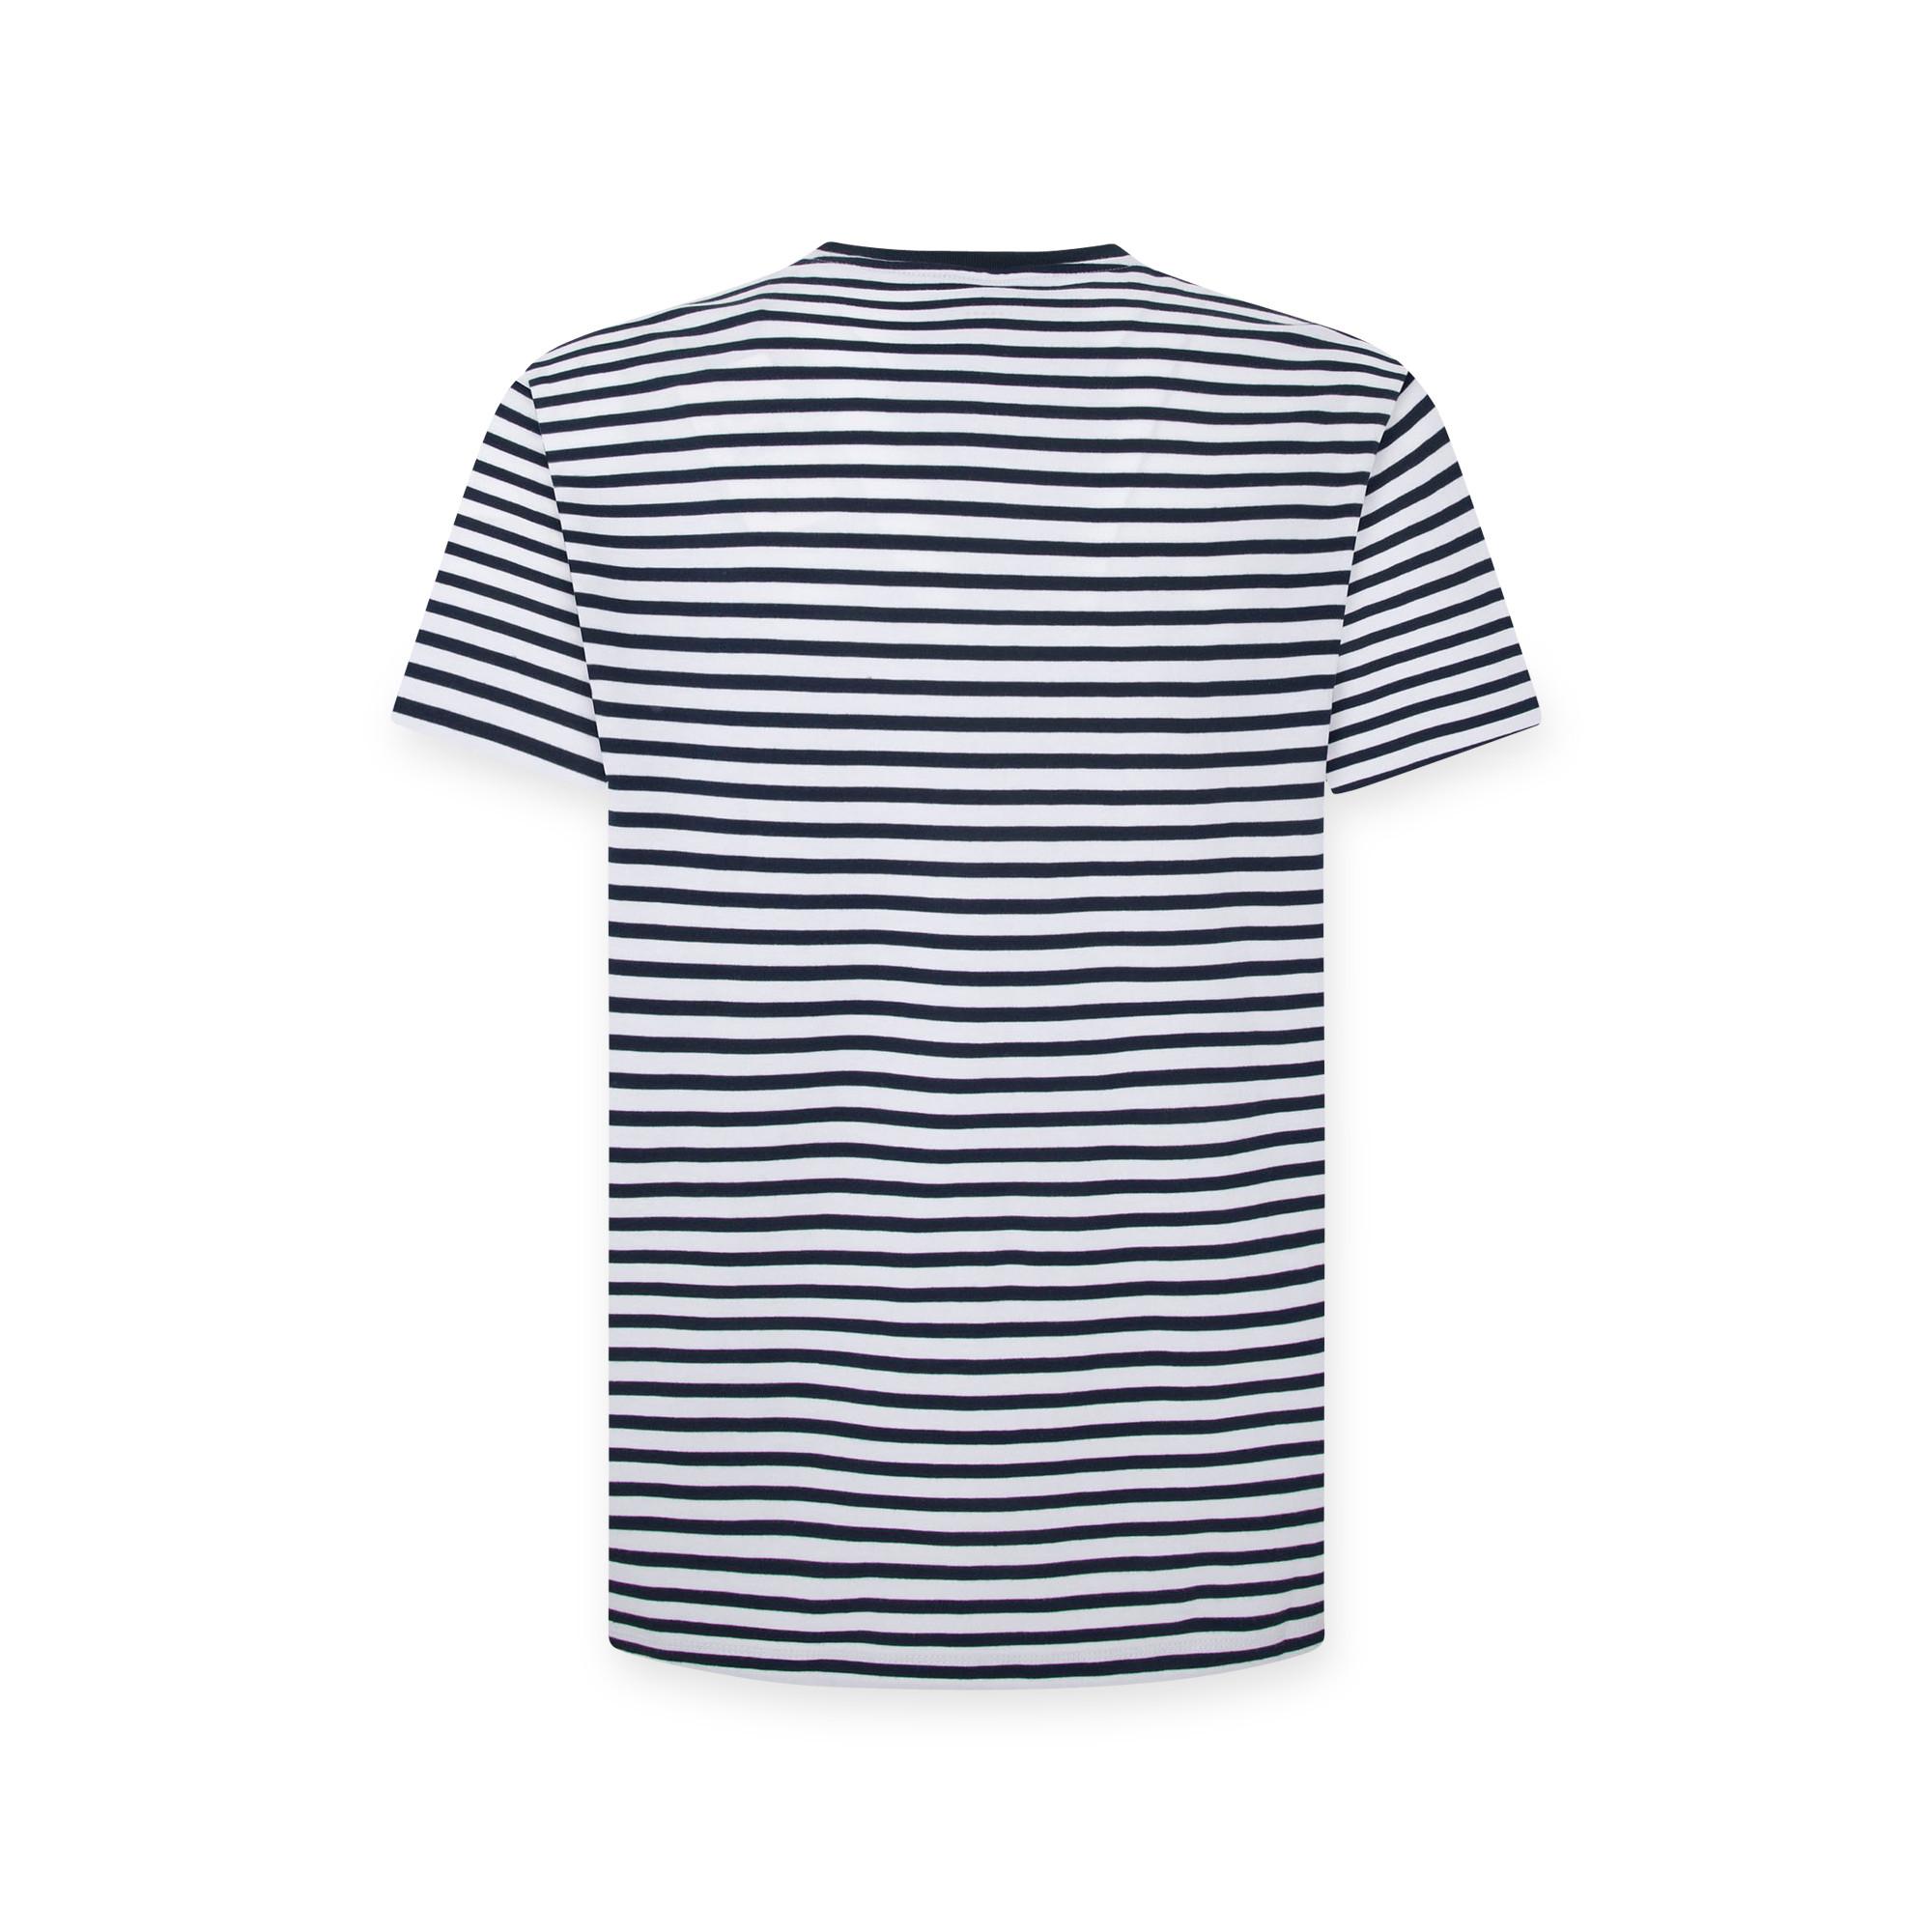 Pepe Jeans CANE T-shirt 